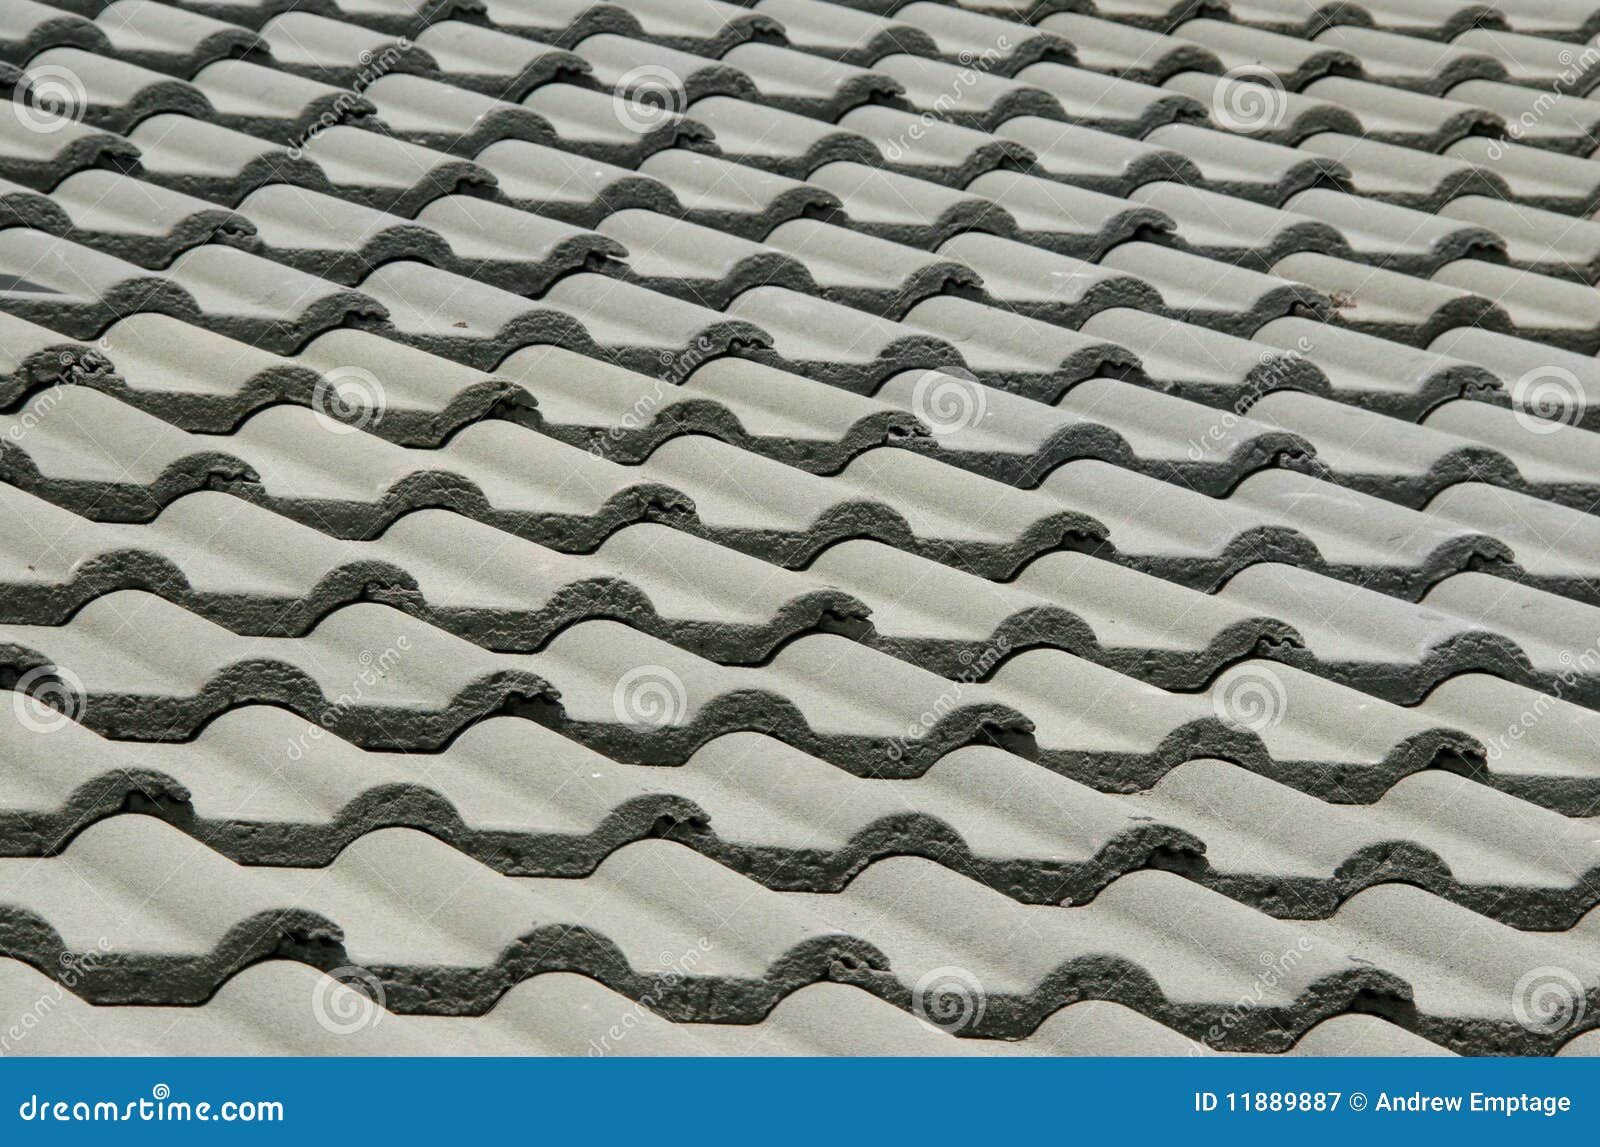 detail of a tiled roof